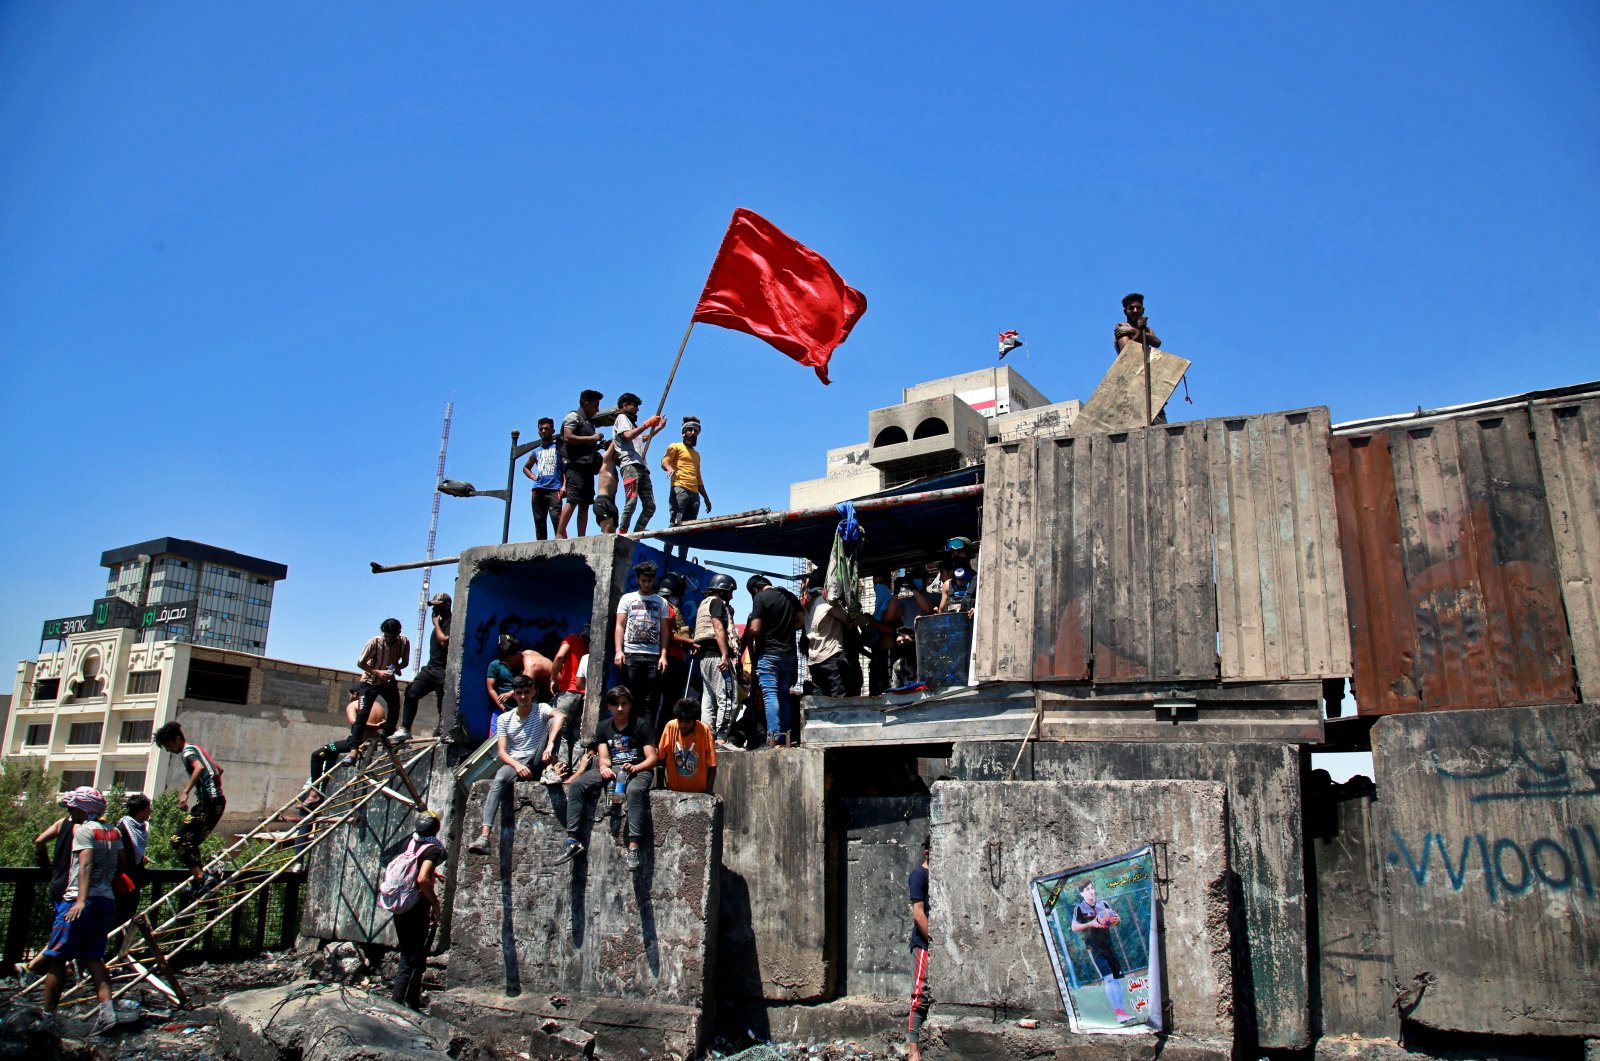 Anti-government protesters stage a sit-in on barriers set up by security forces to close the Jumhuriyah Bridge leading to the Green Zone government area, during ongoing protests in Baghdad, Iraq, May 10, 2020. (AP Photo)